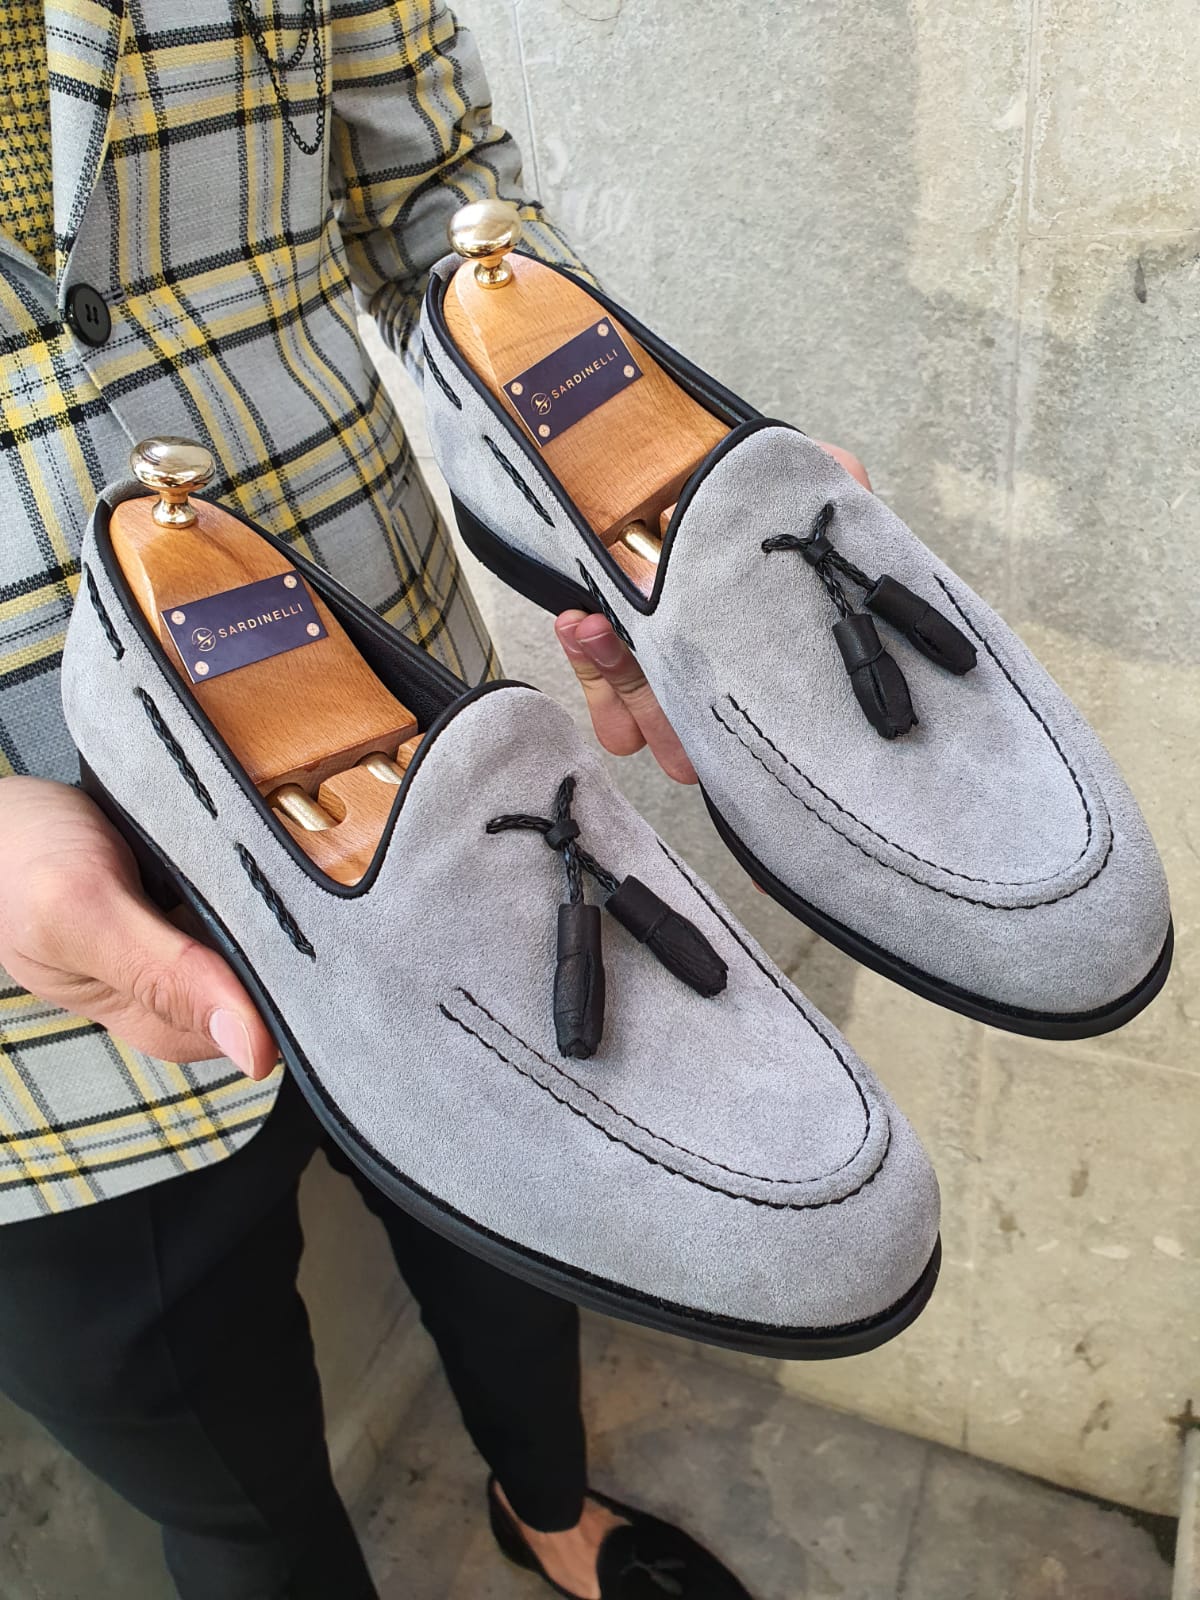 GRAY SARDINELLI SUADE CALF-LEATHER LOAFER